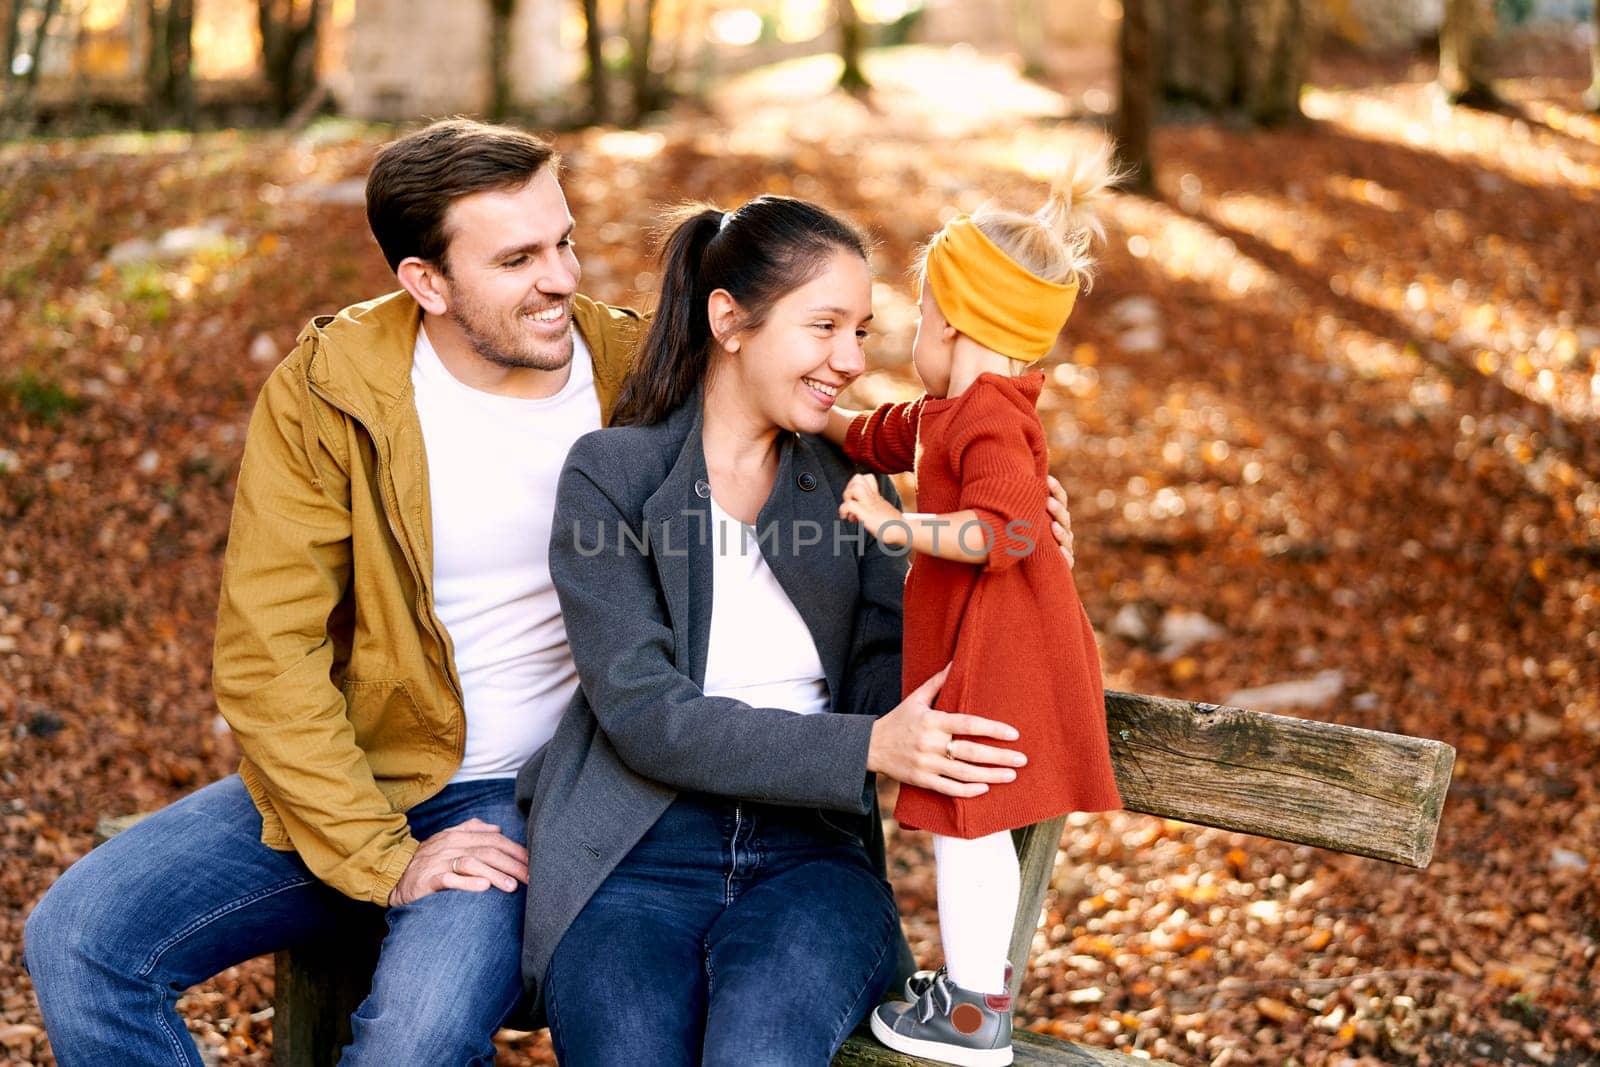 Little girl touches dad sitting with mom on bench in autumn forest. High quality photo